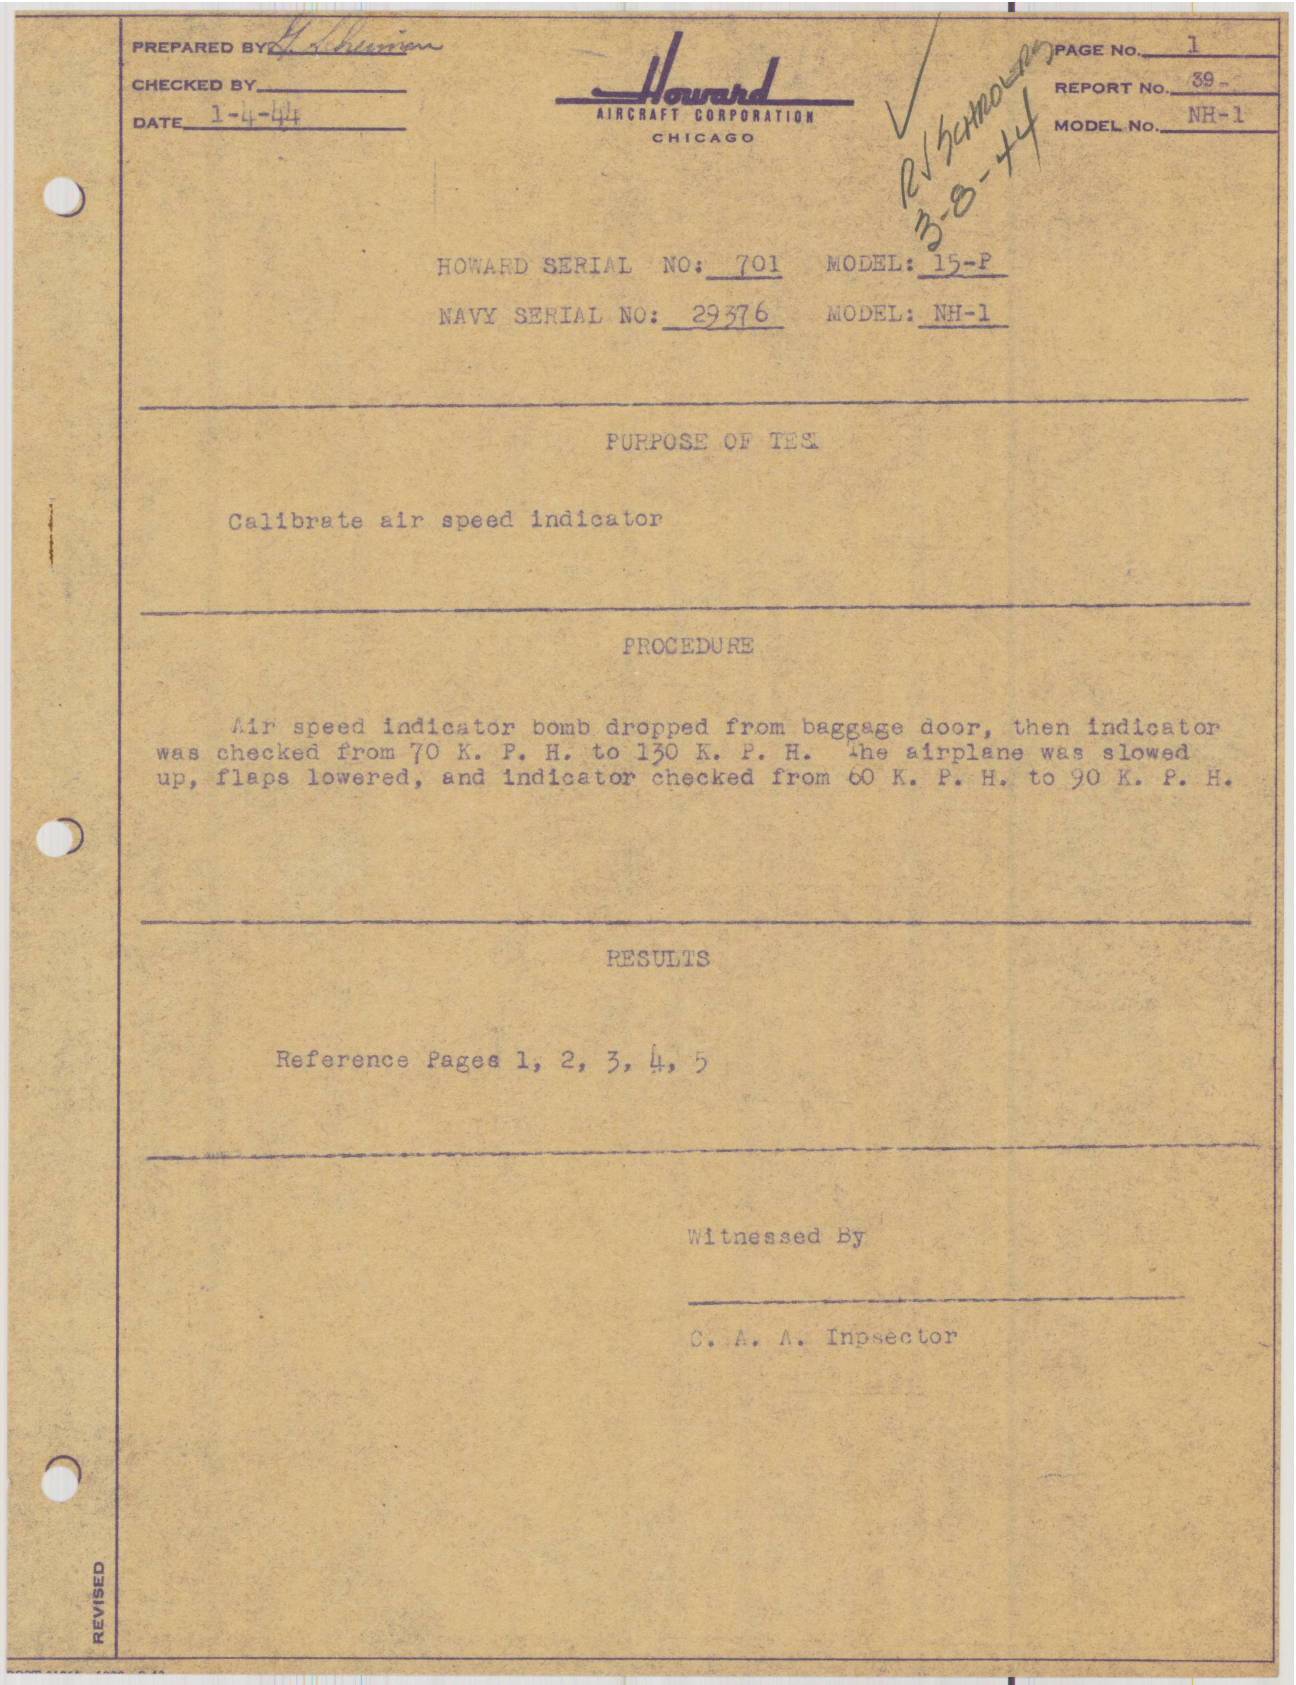 Sample page 2 from AirCorps Library document: Report 39, Flight Test Report, NH-1